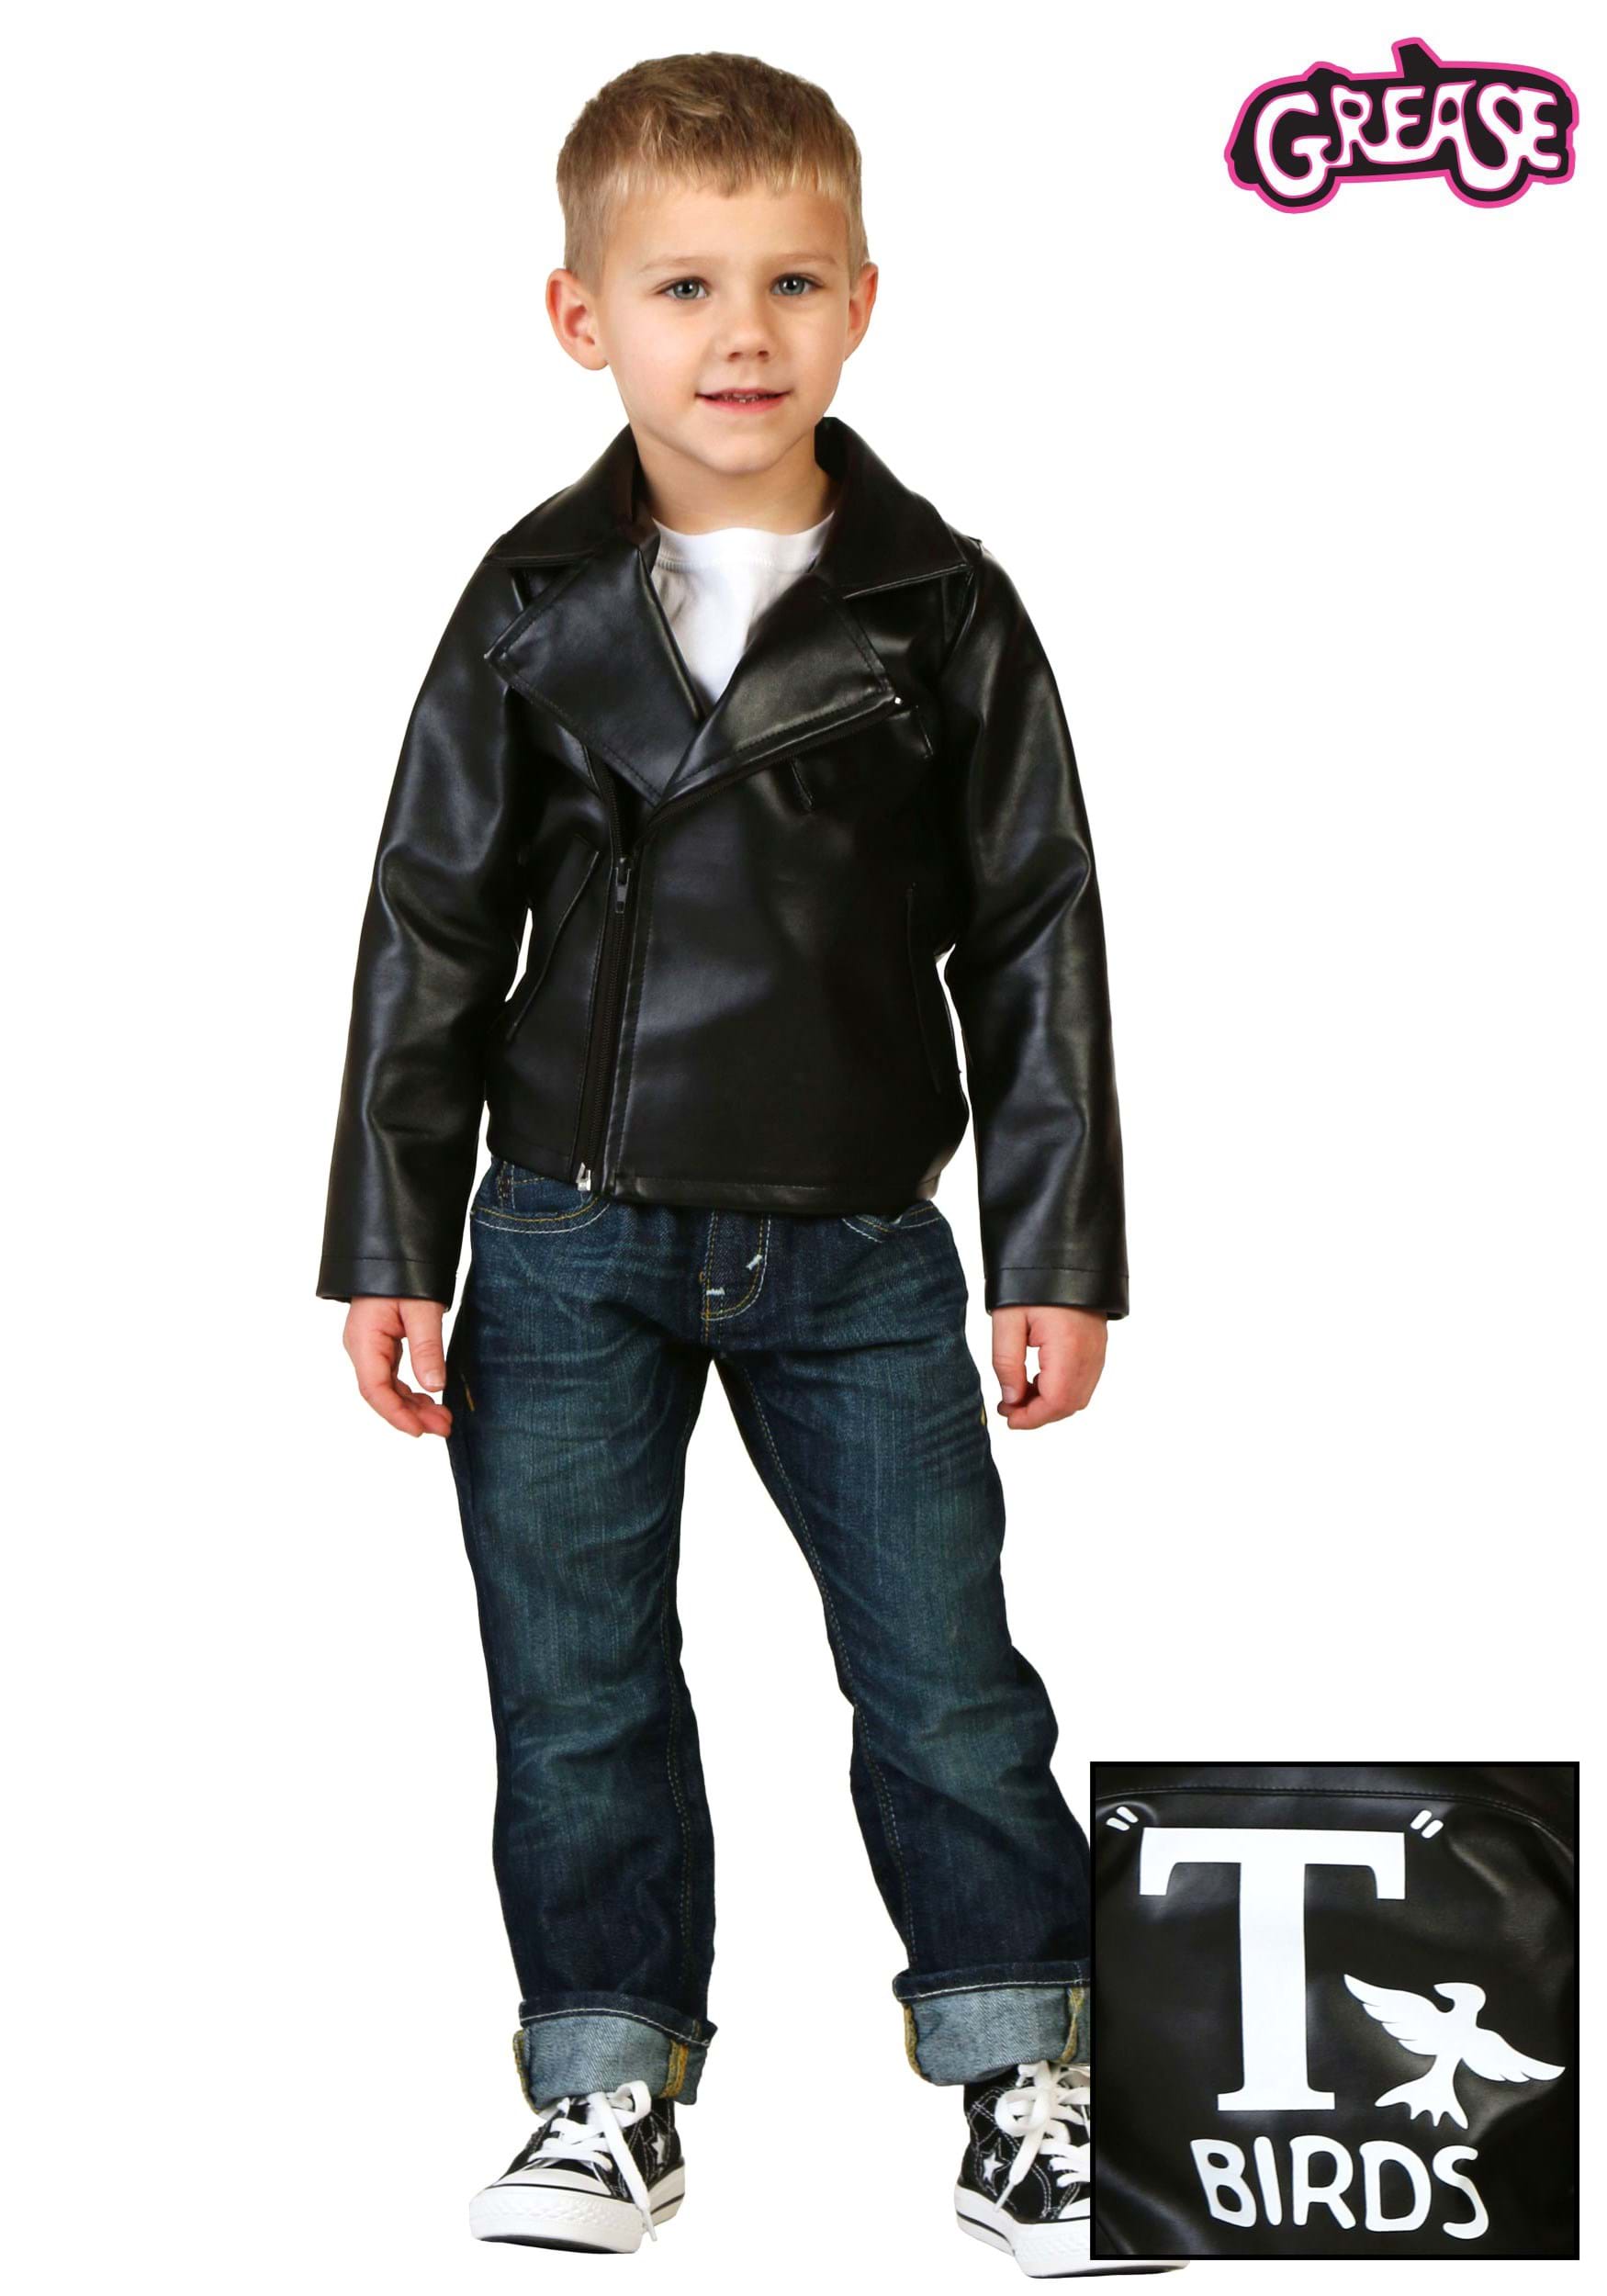 Toddler Grease T-Birds Jacket Costume | Officially licensed costume